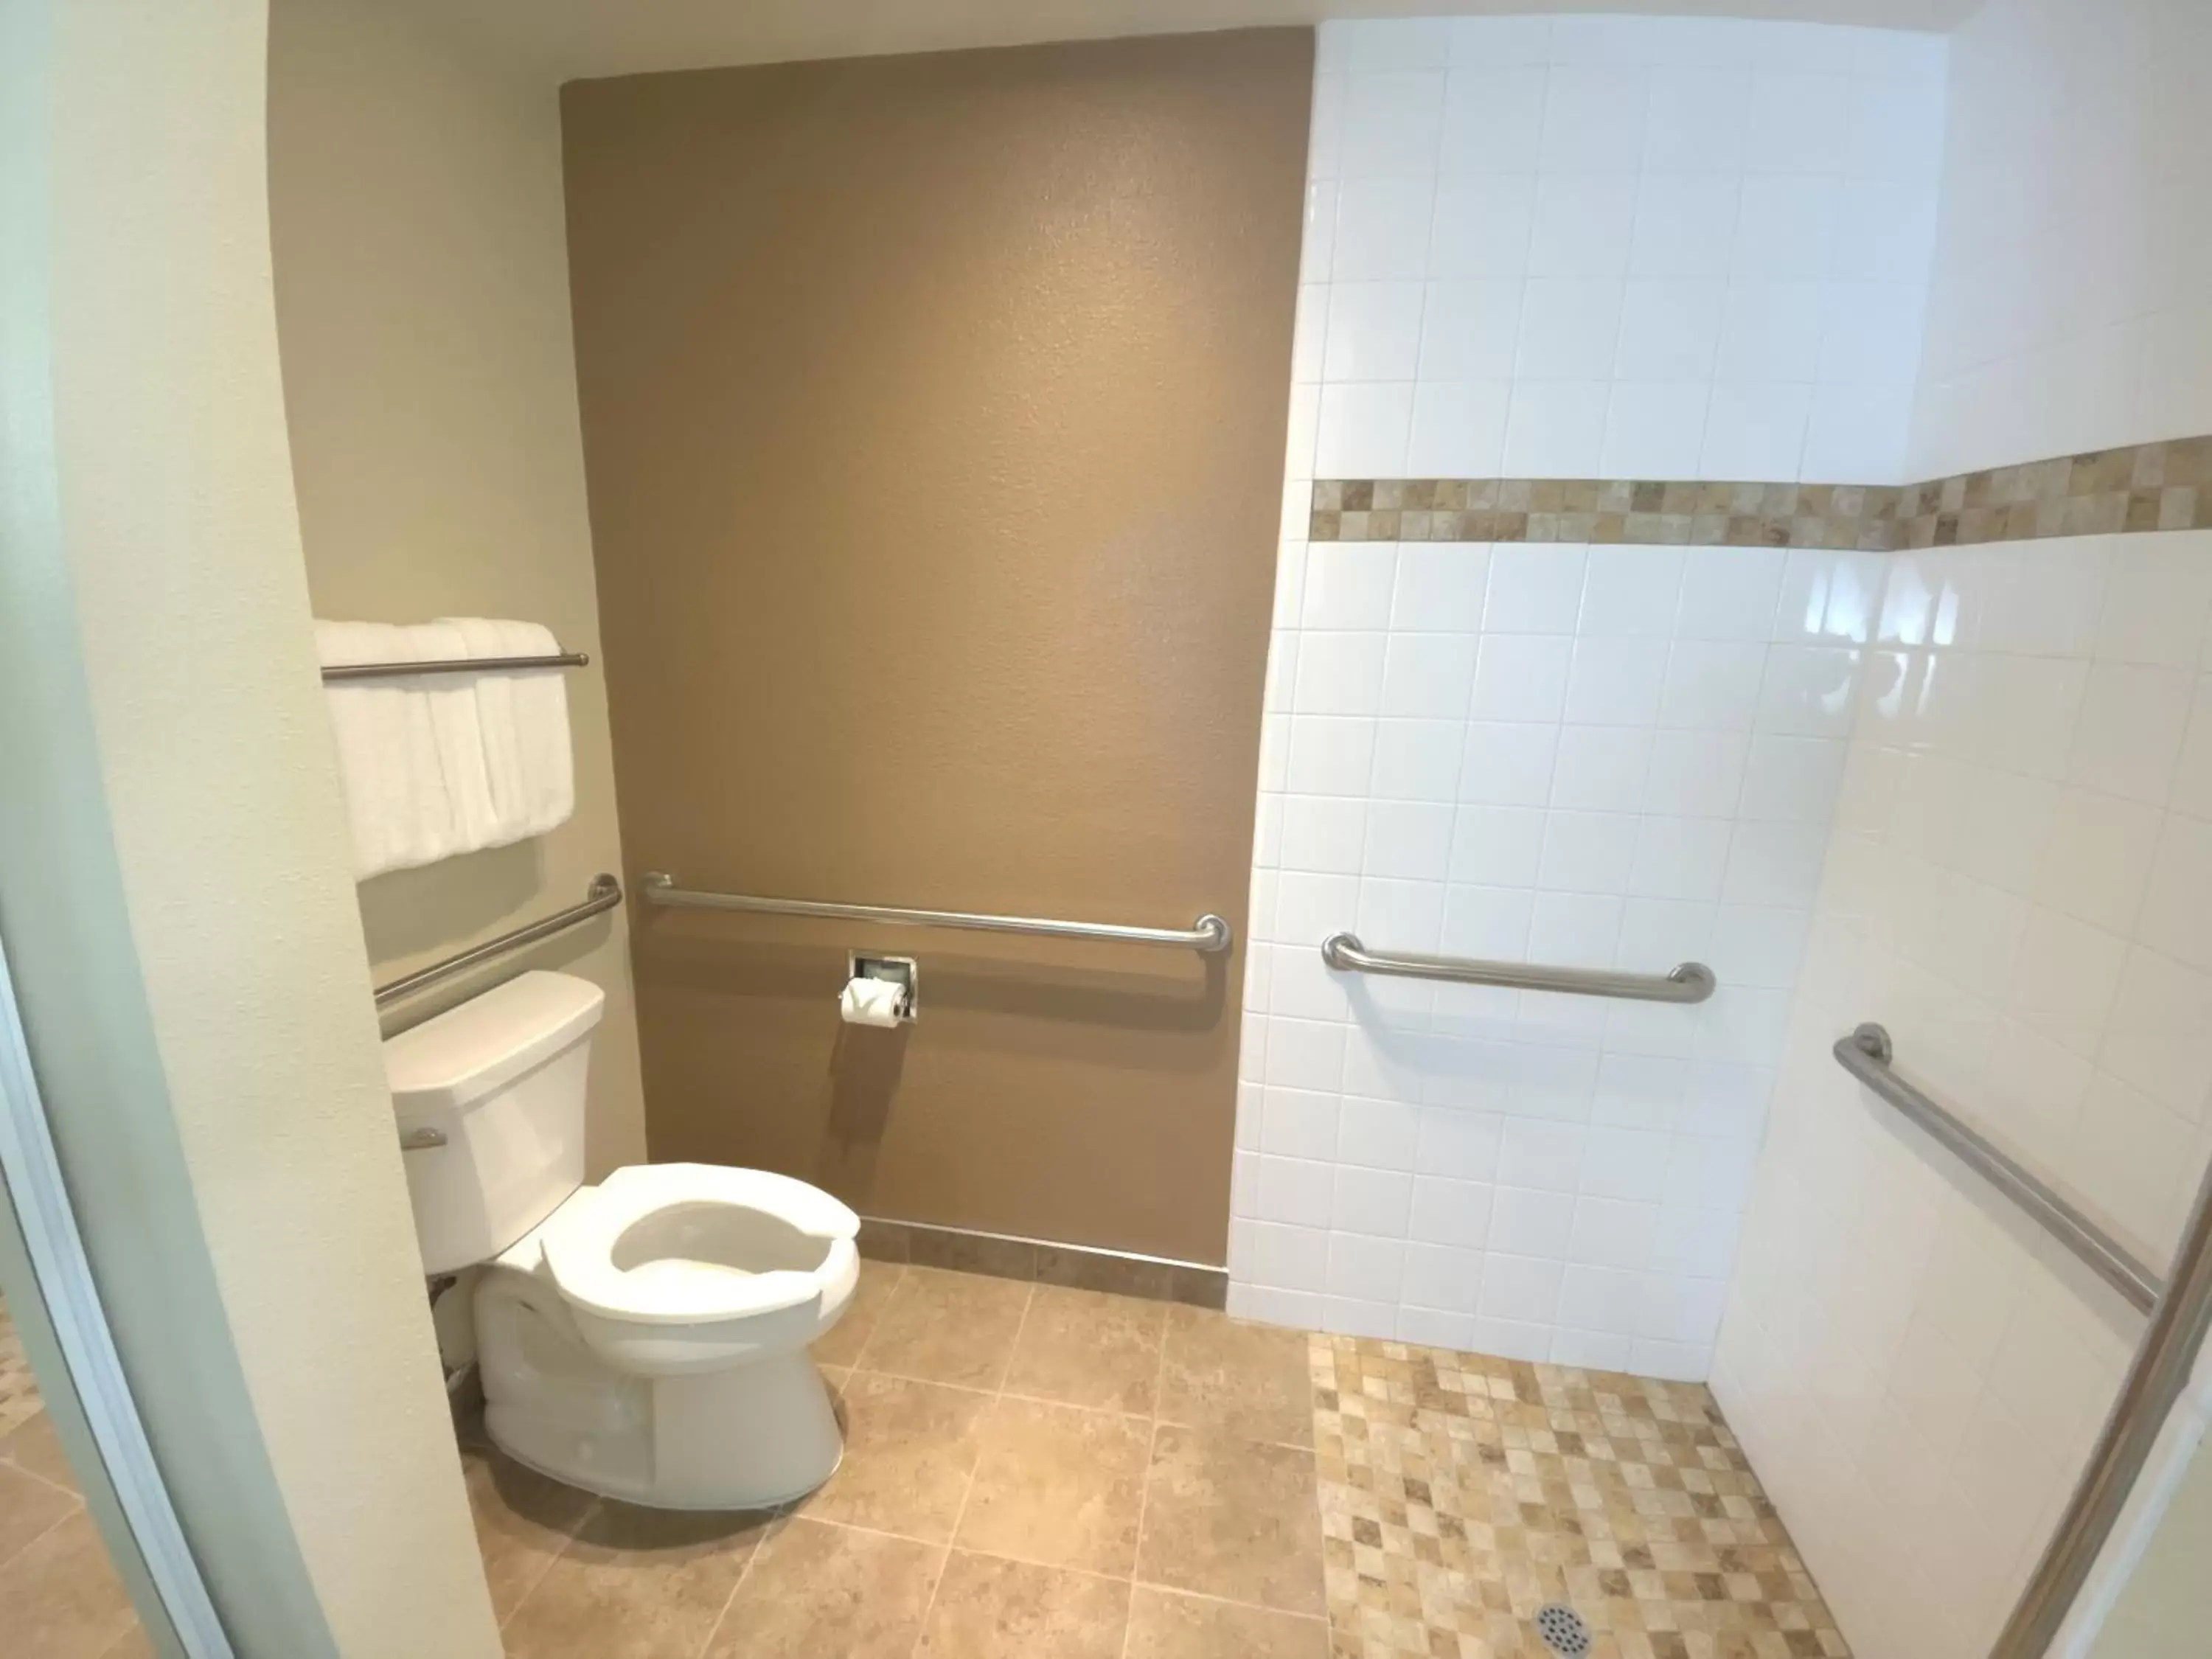 Facility for disabled guests, Bathroom in GOVERNORS INN HOTEL SACRAMENTO